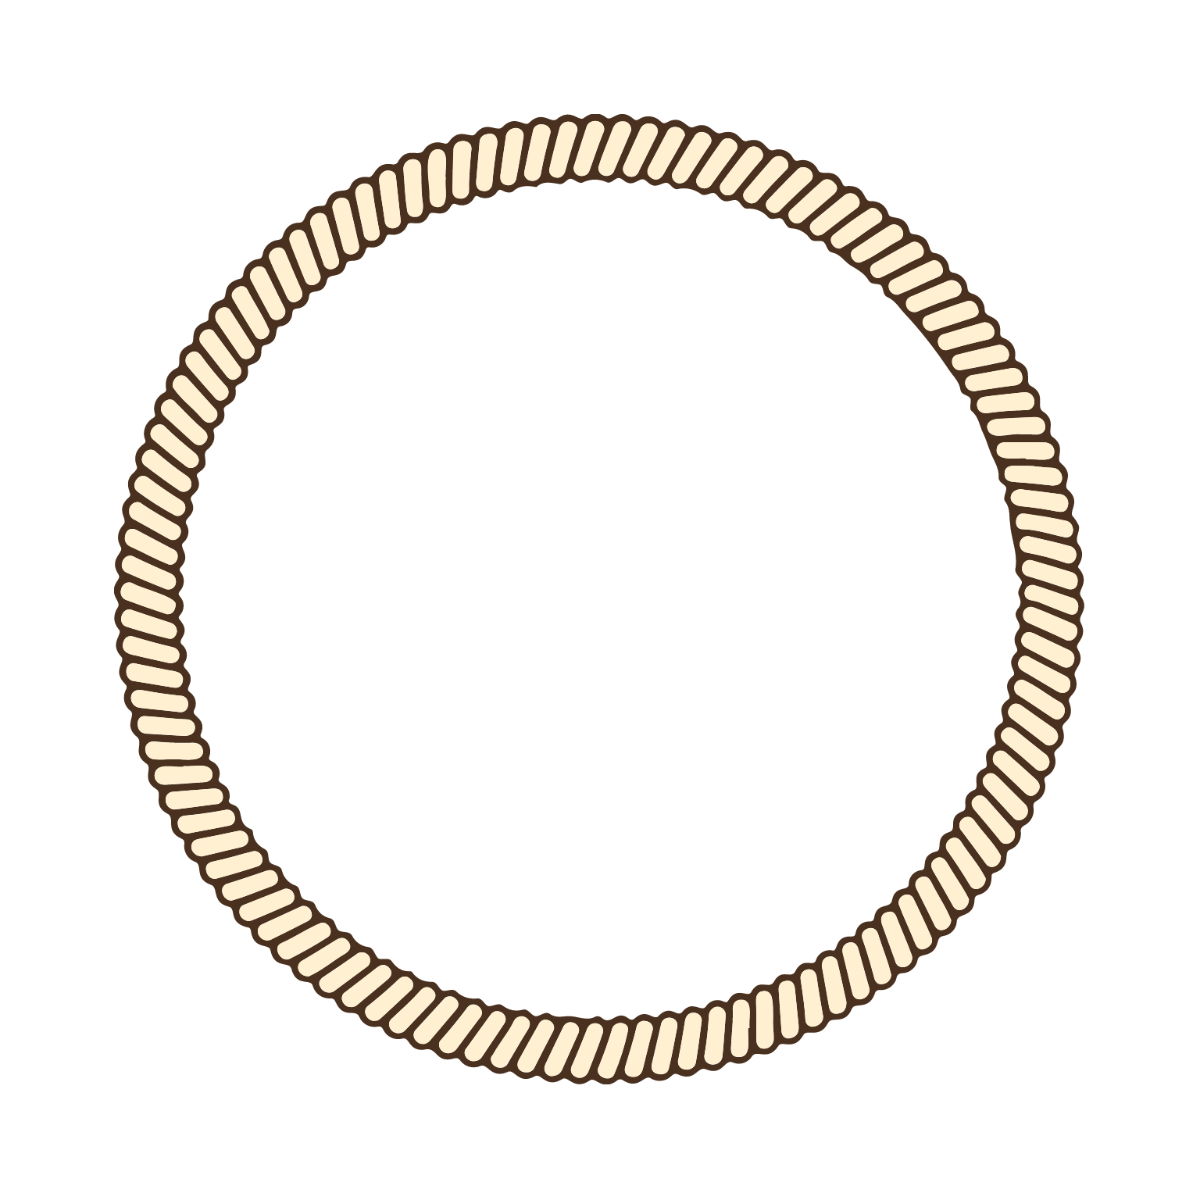 Round Rope clipart Template